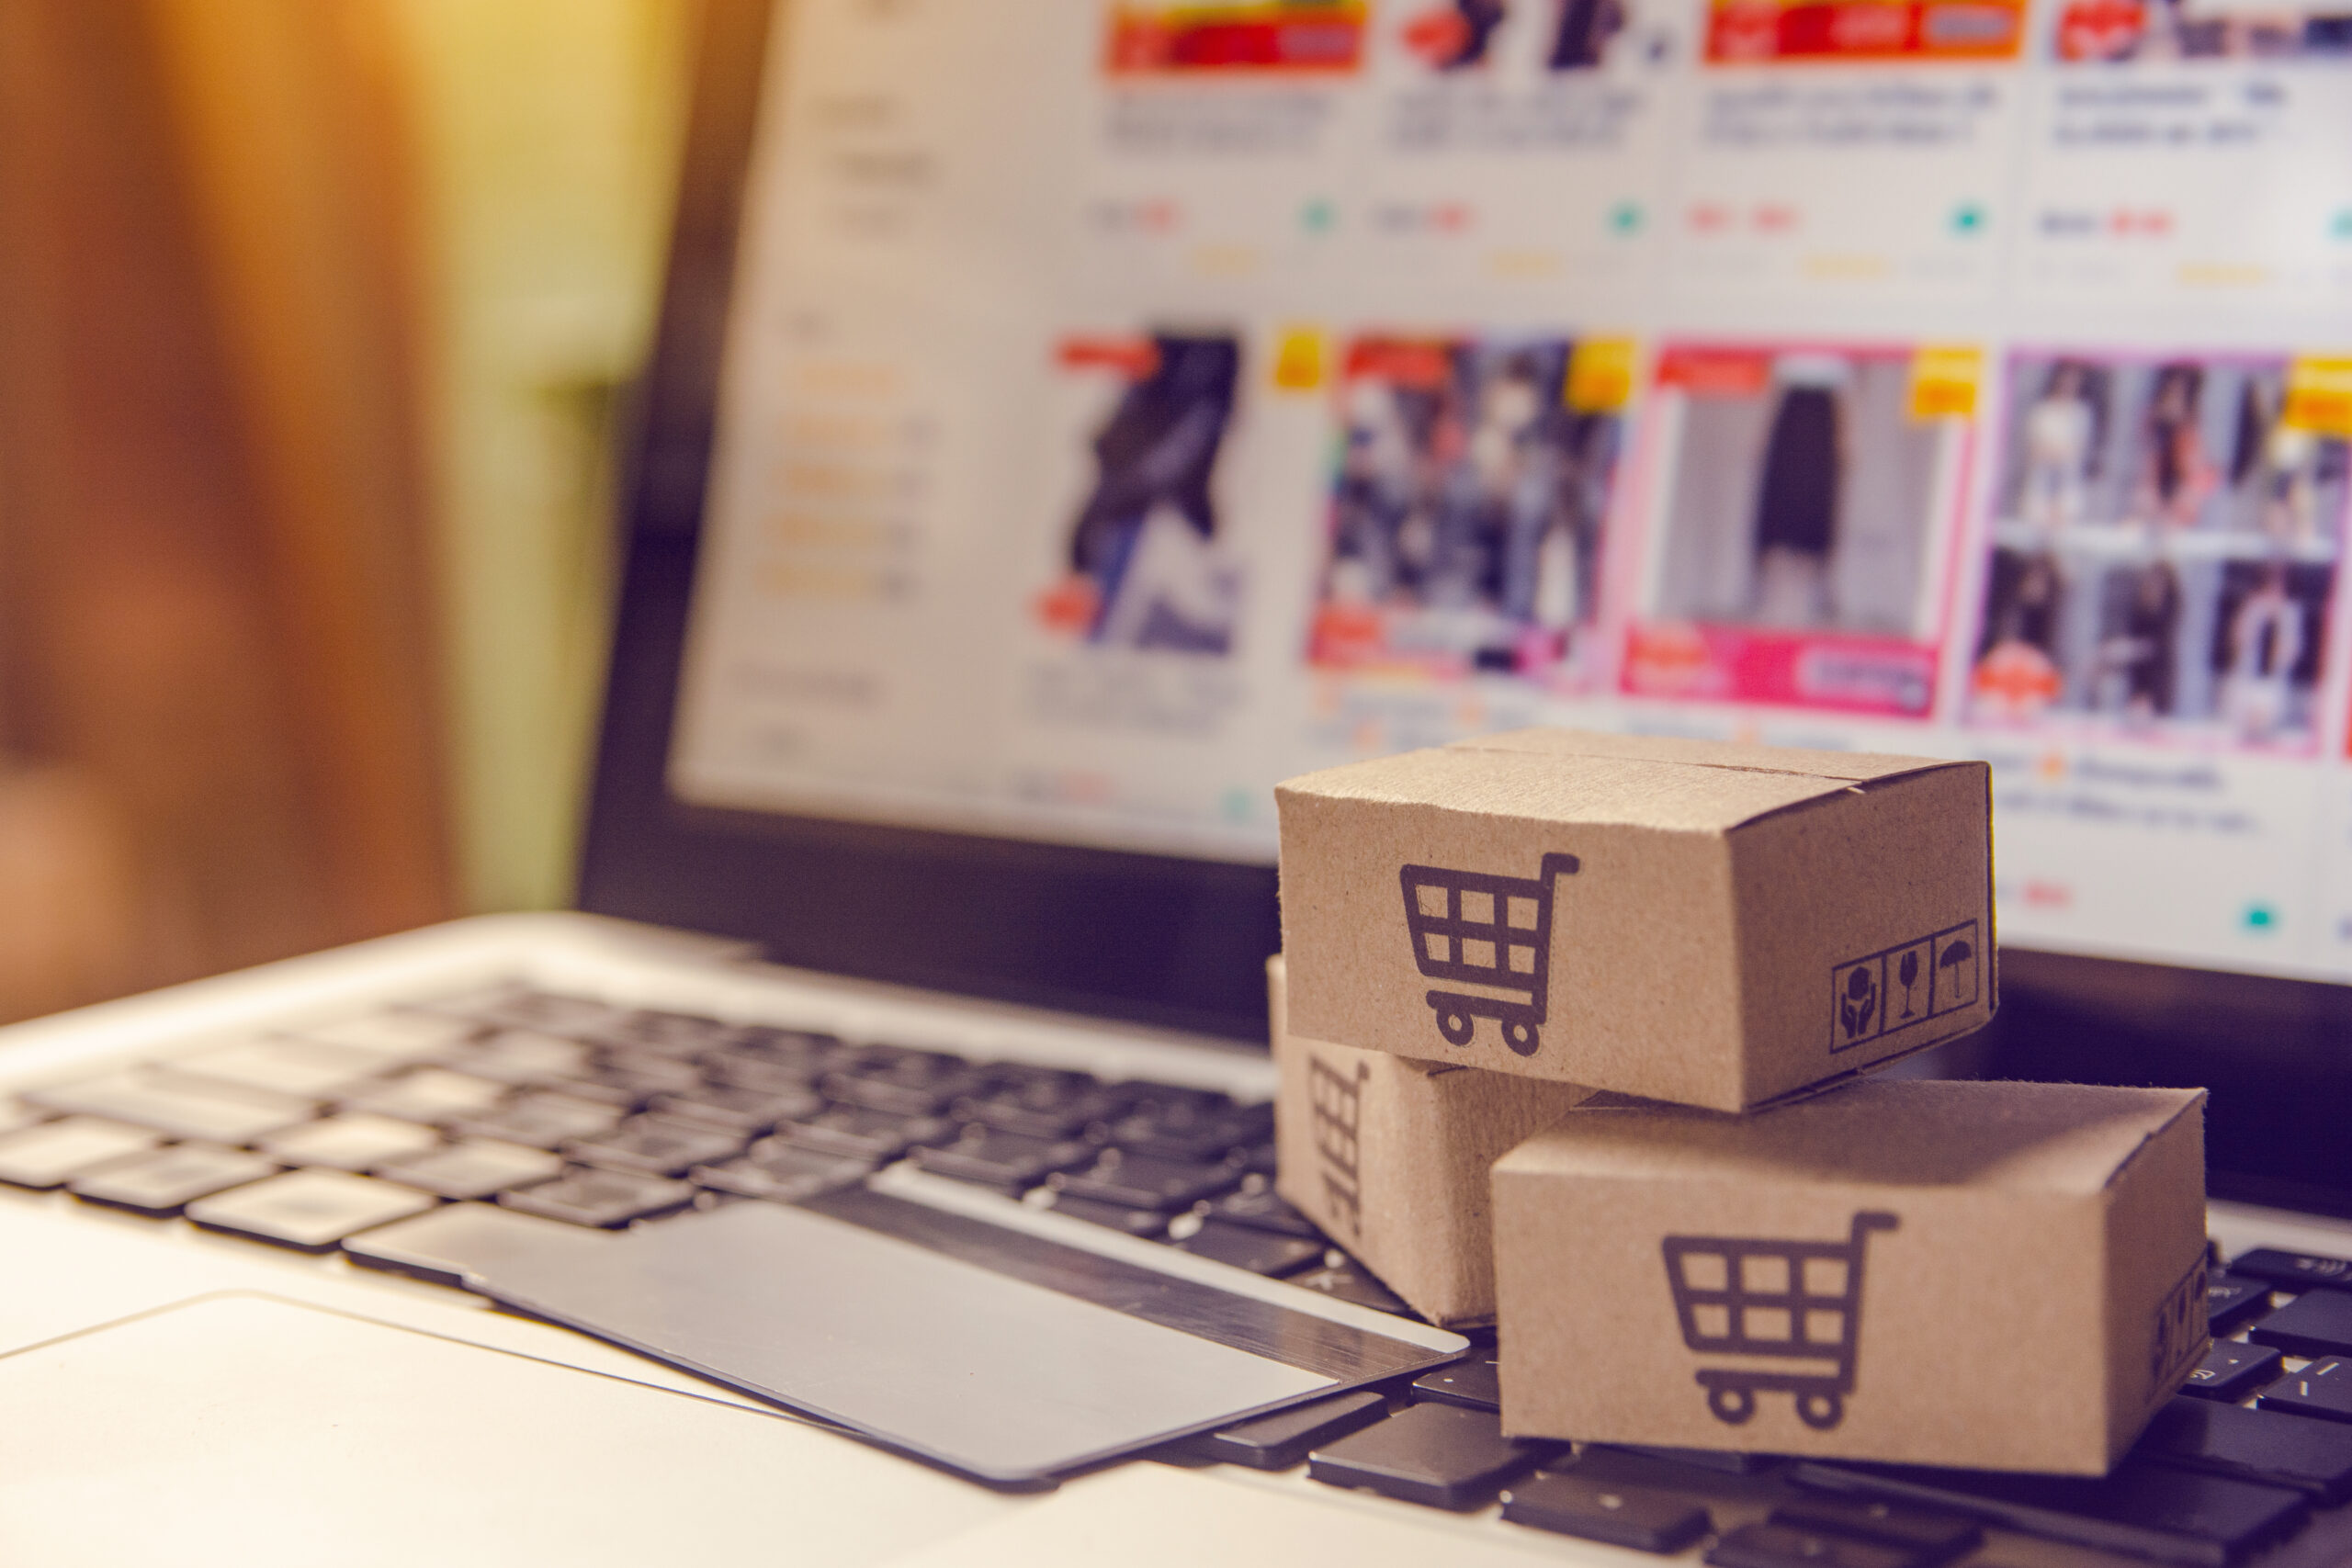 Shopping online concept - Shopping service on The online web. with payment by credit card and offers home delivery. parcel or Paper cartons with a shopping cart logo on a laptop keyboard